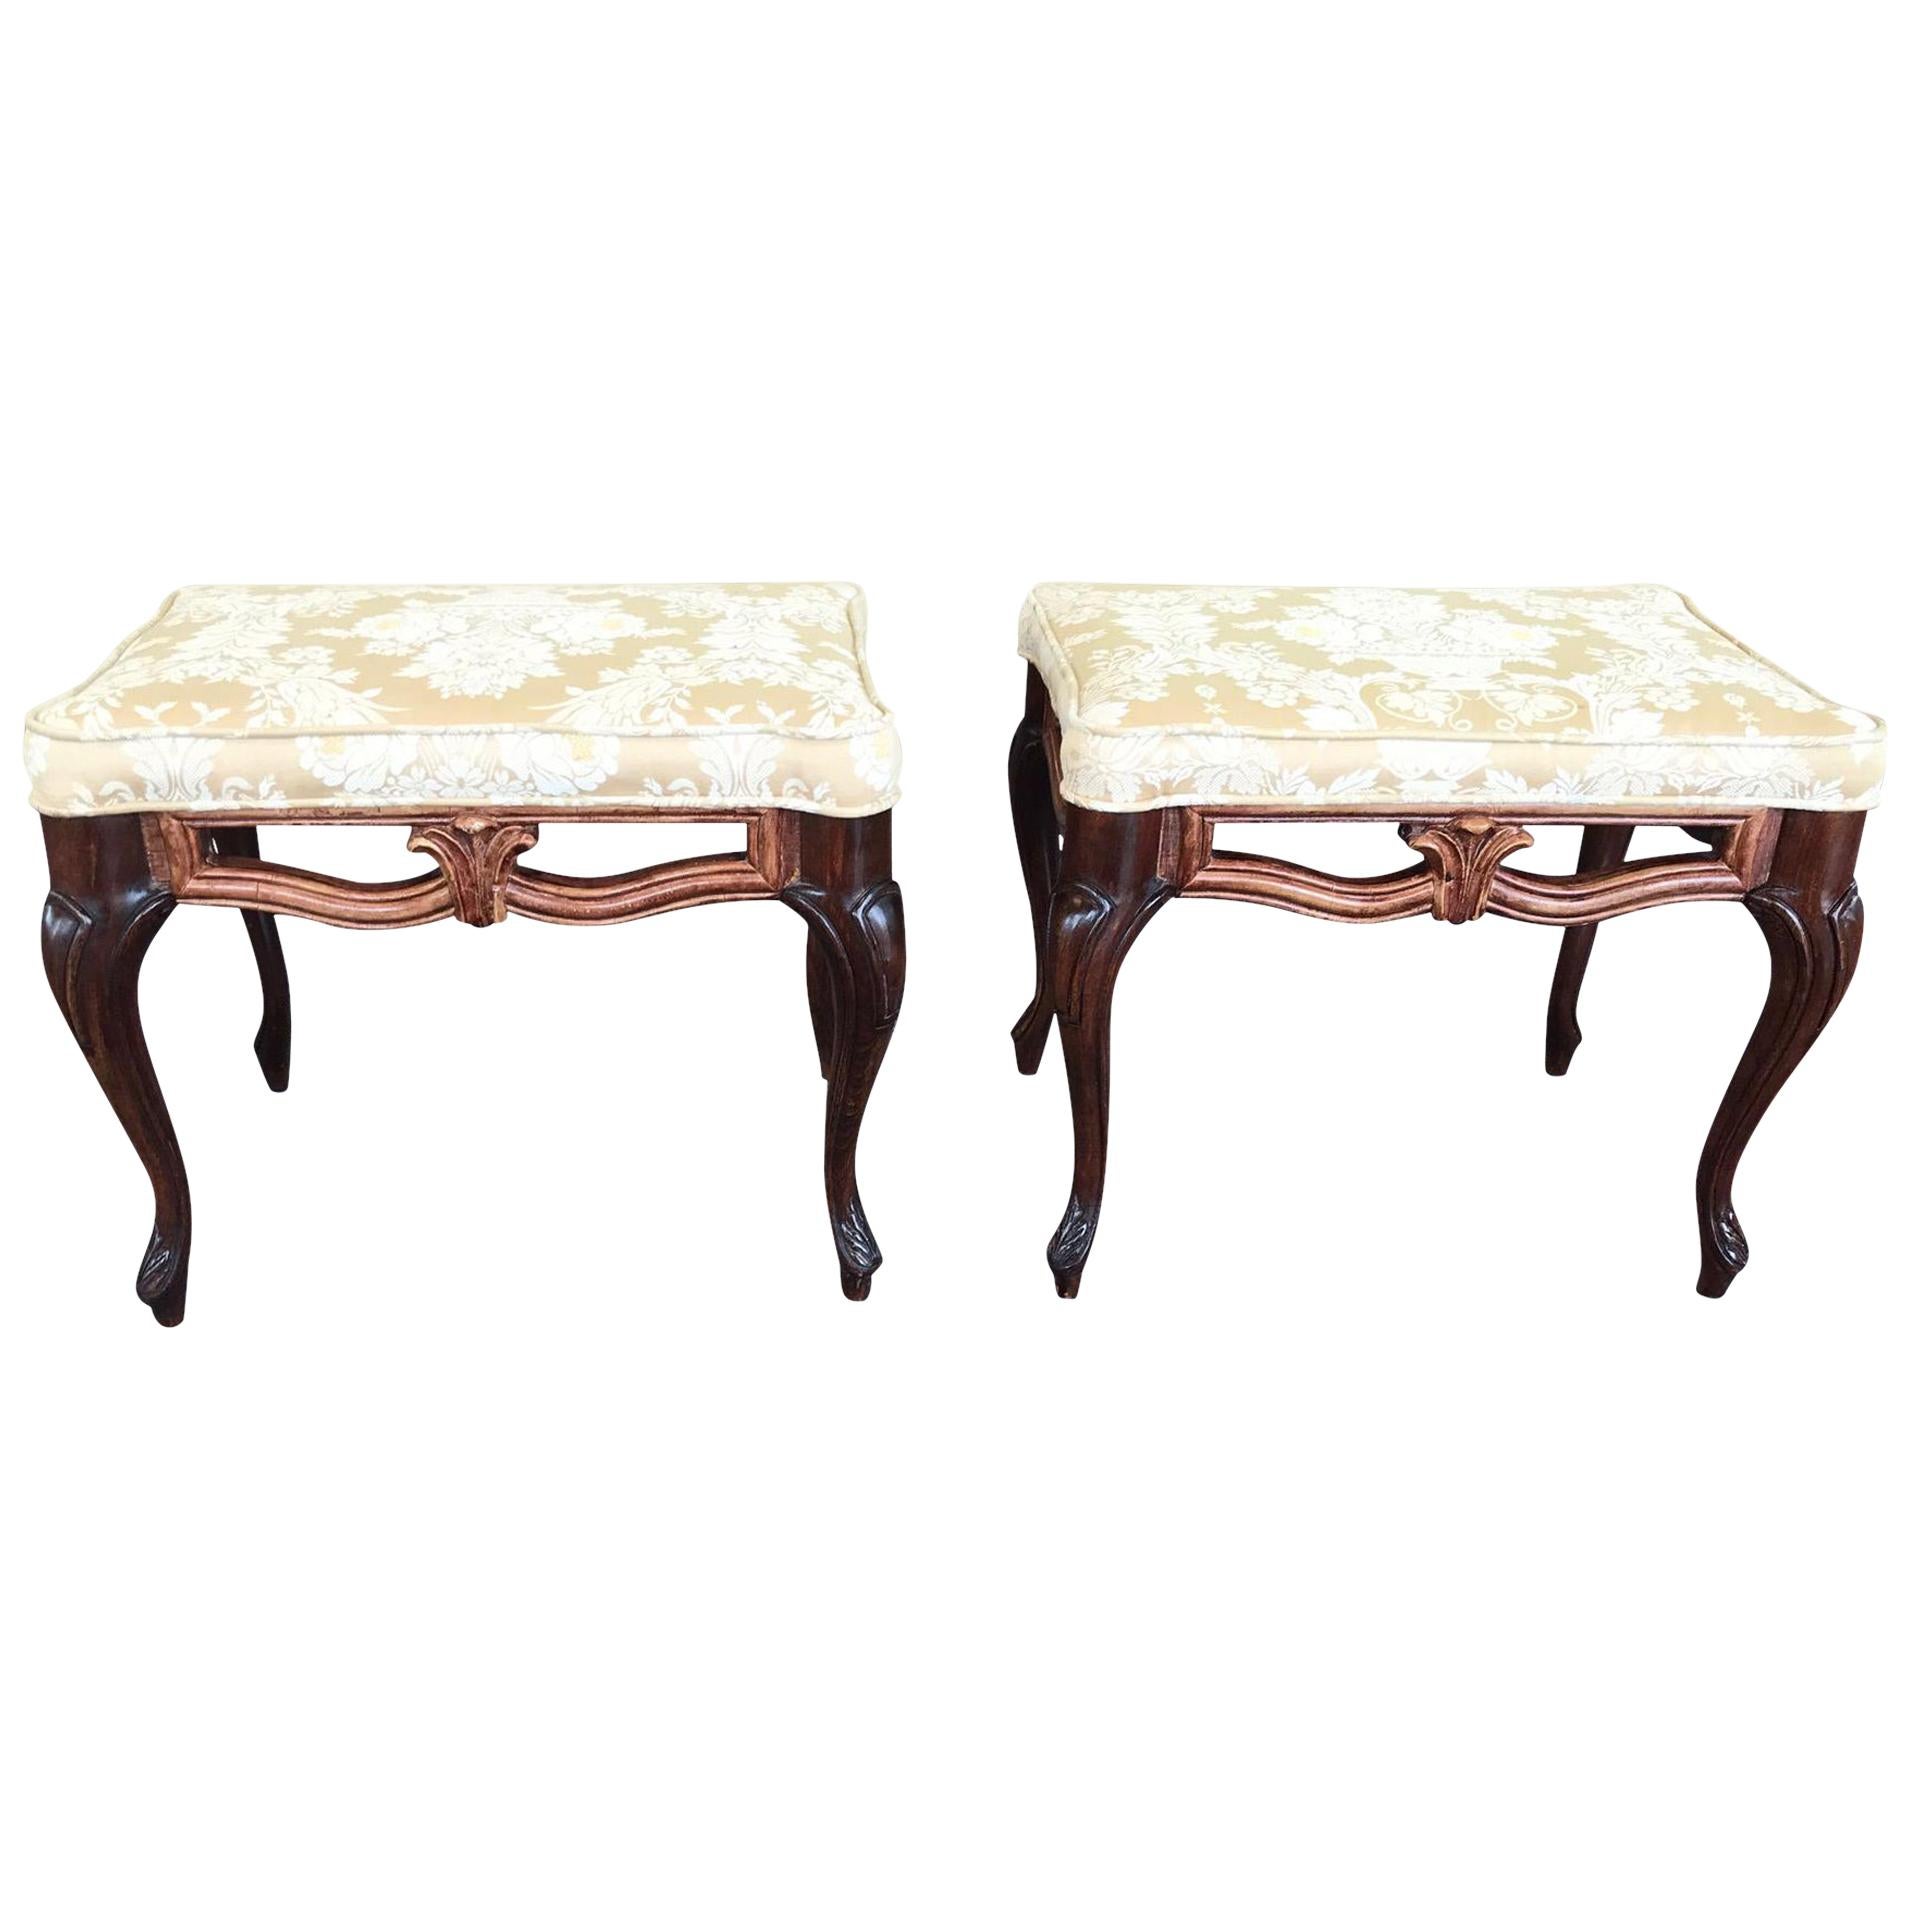 Pair of Early 20th Century Vintage Ottoman/Stools, Carved Wood/ Cream Floral For Sale